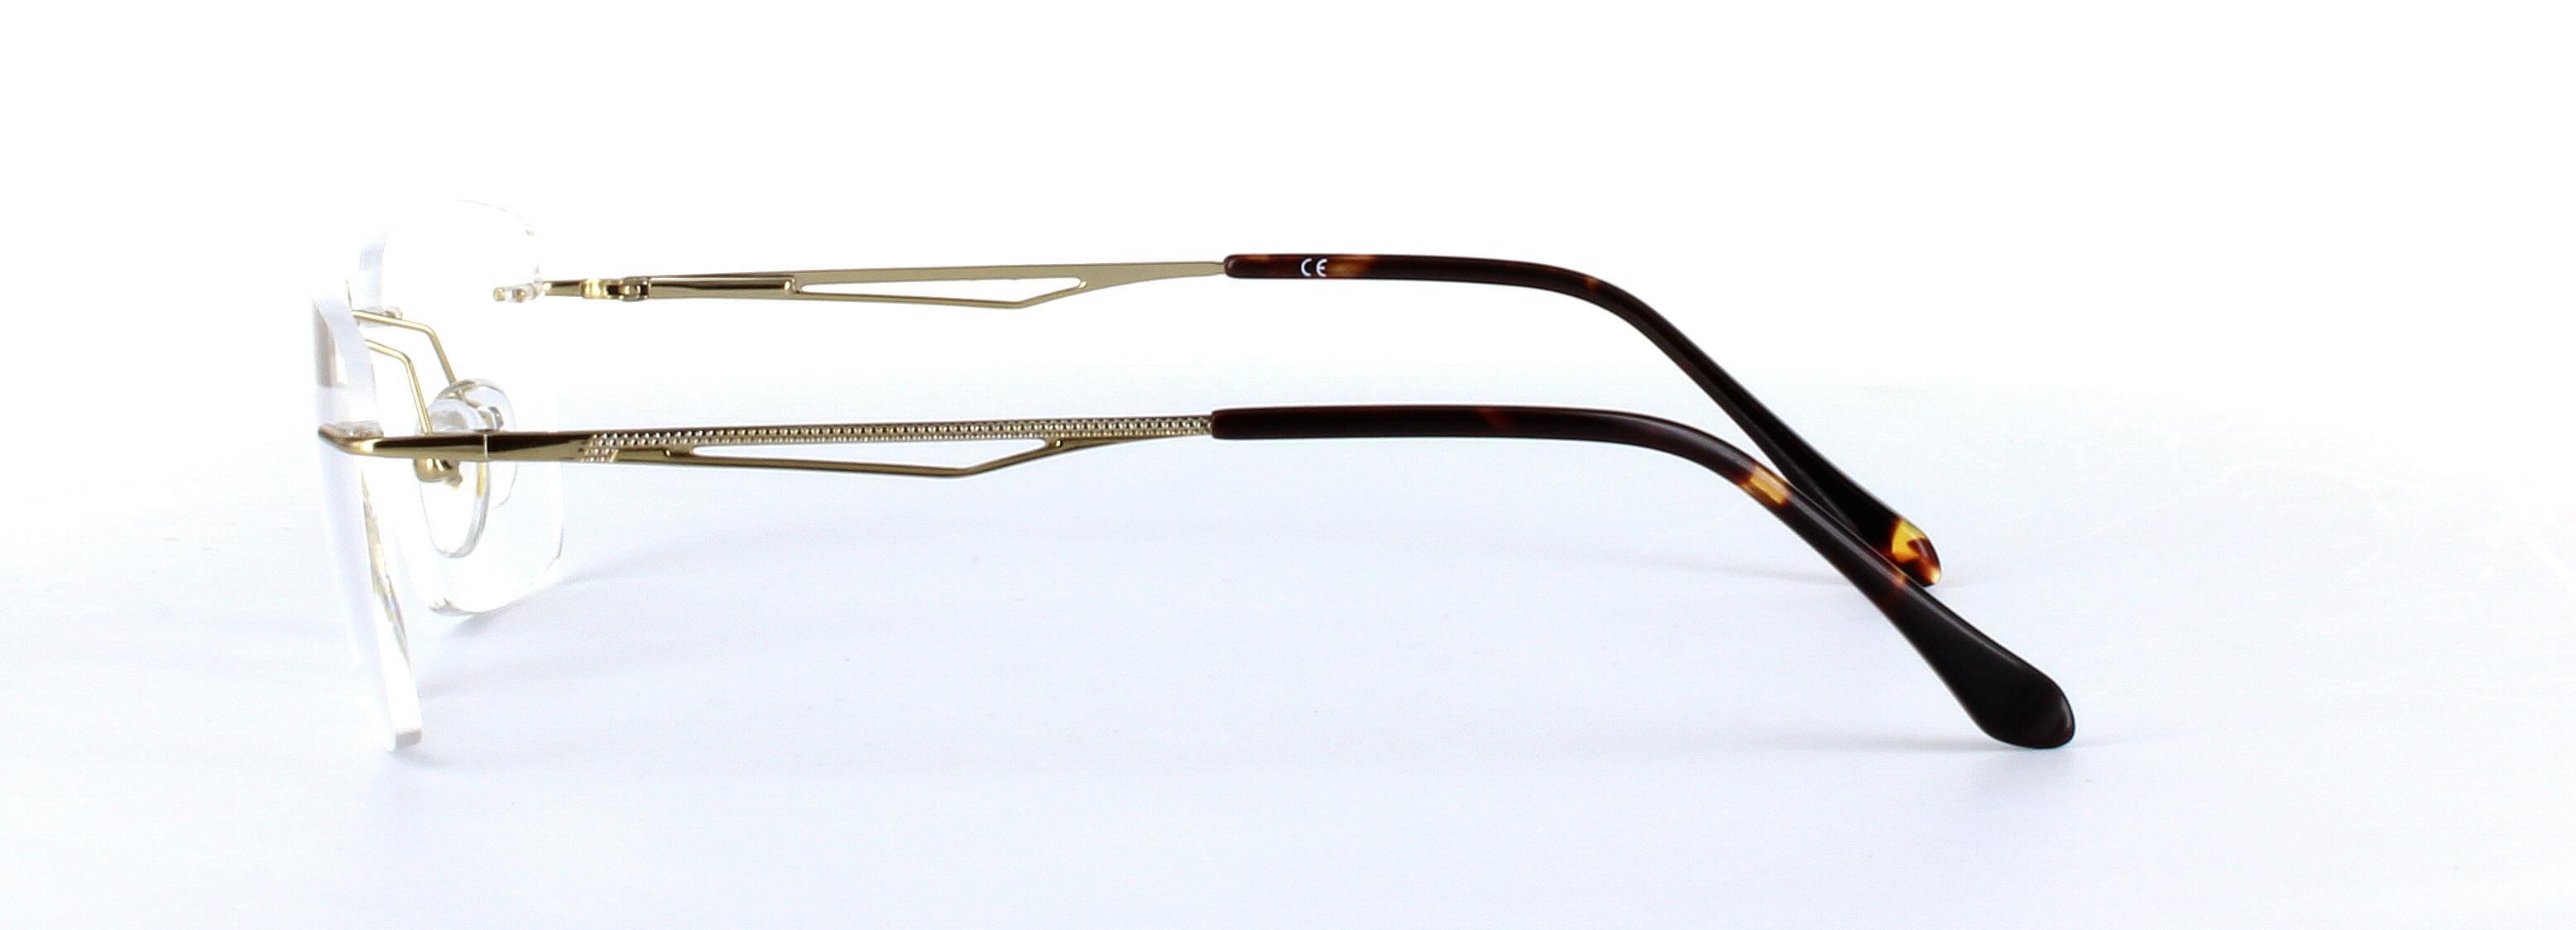 Ghost Gold Rimless Metal Glasses - Image View 2